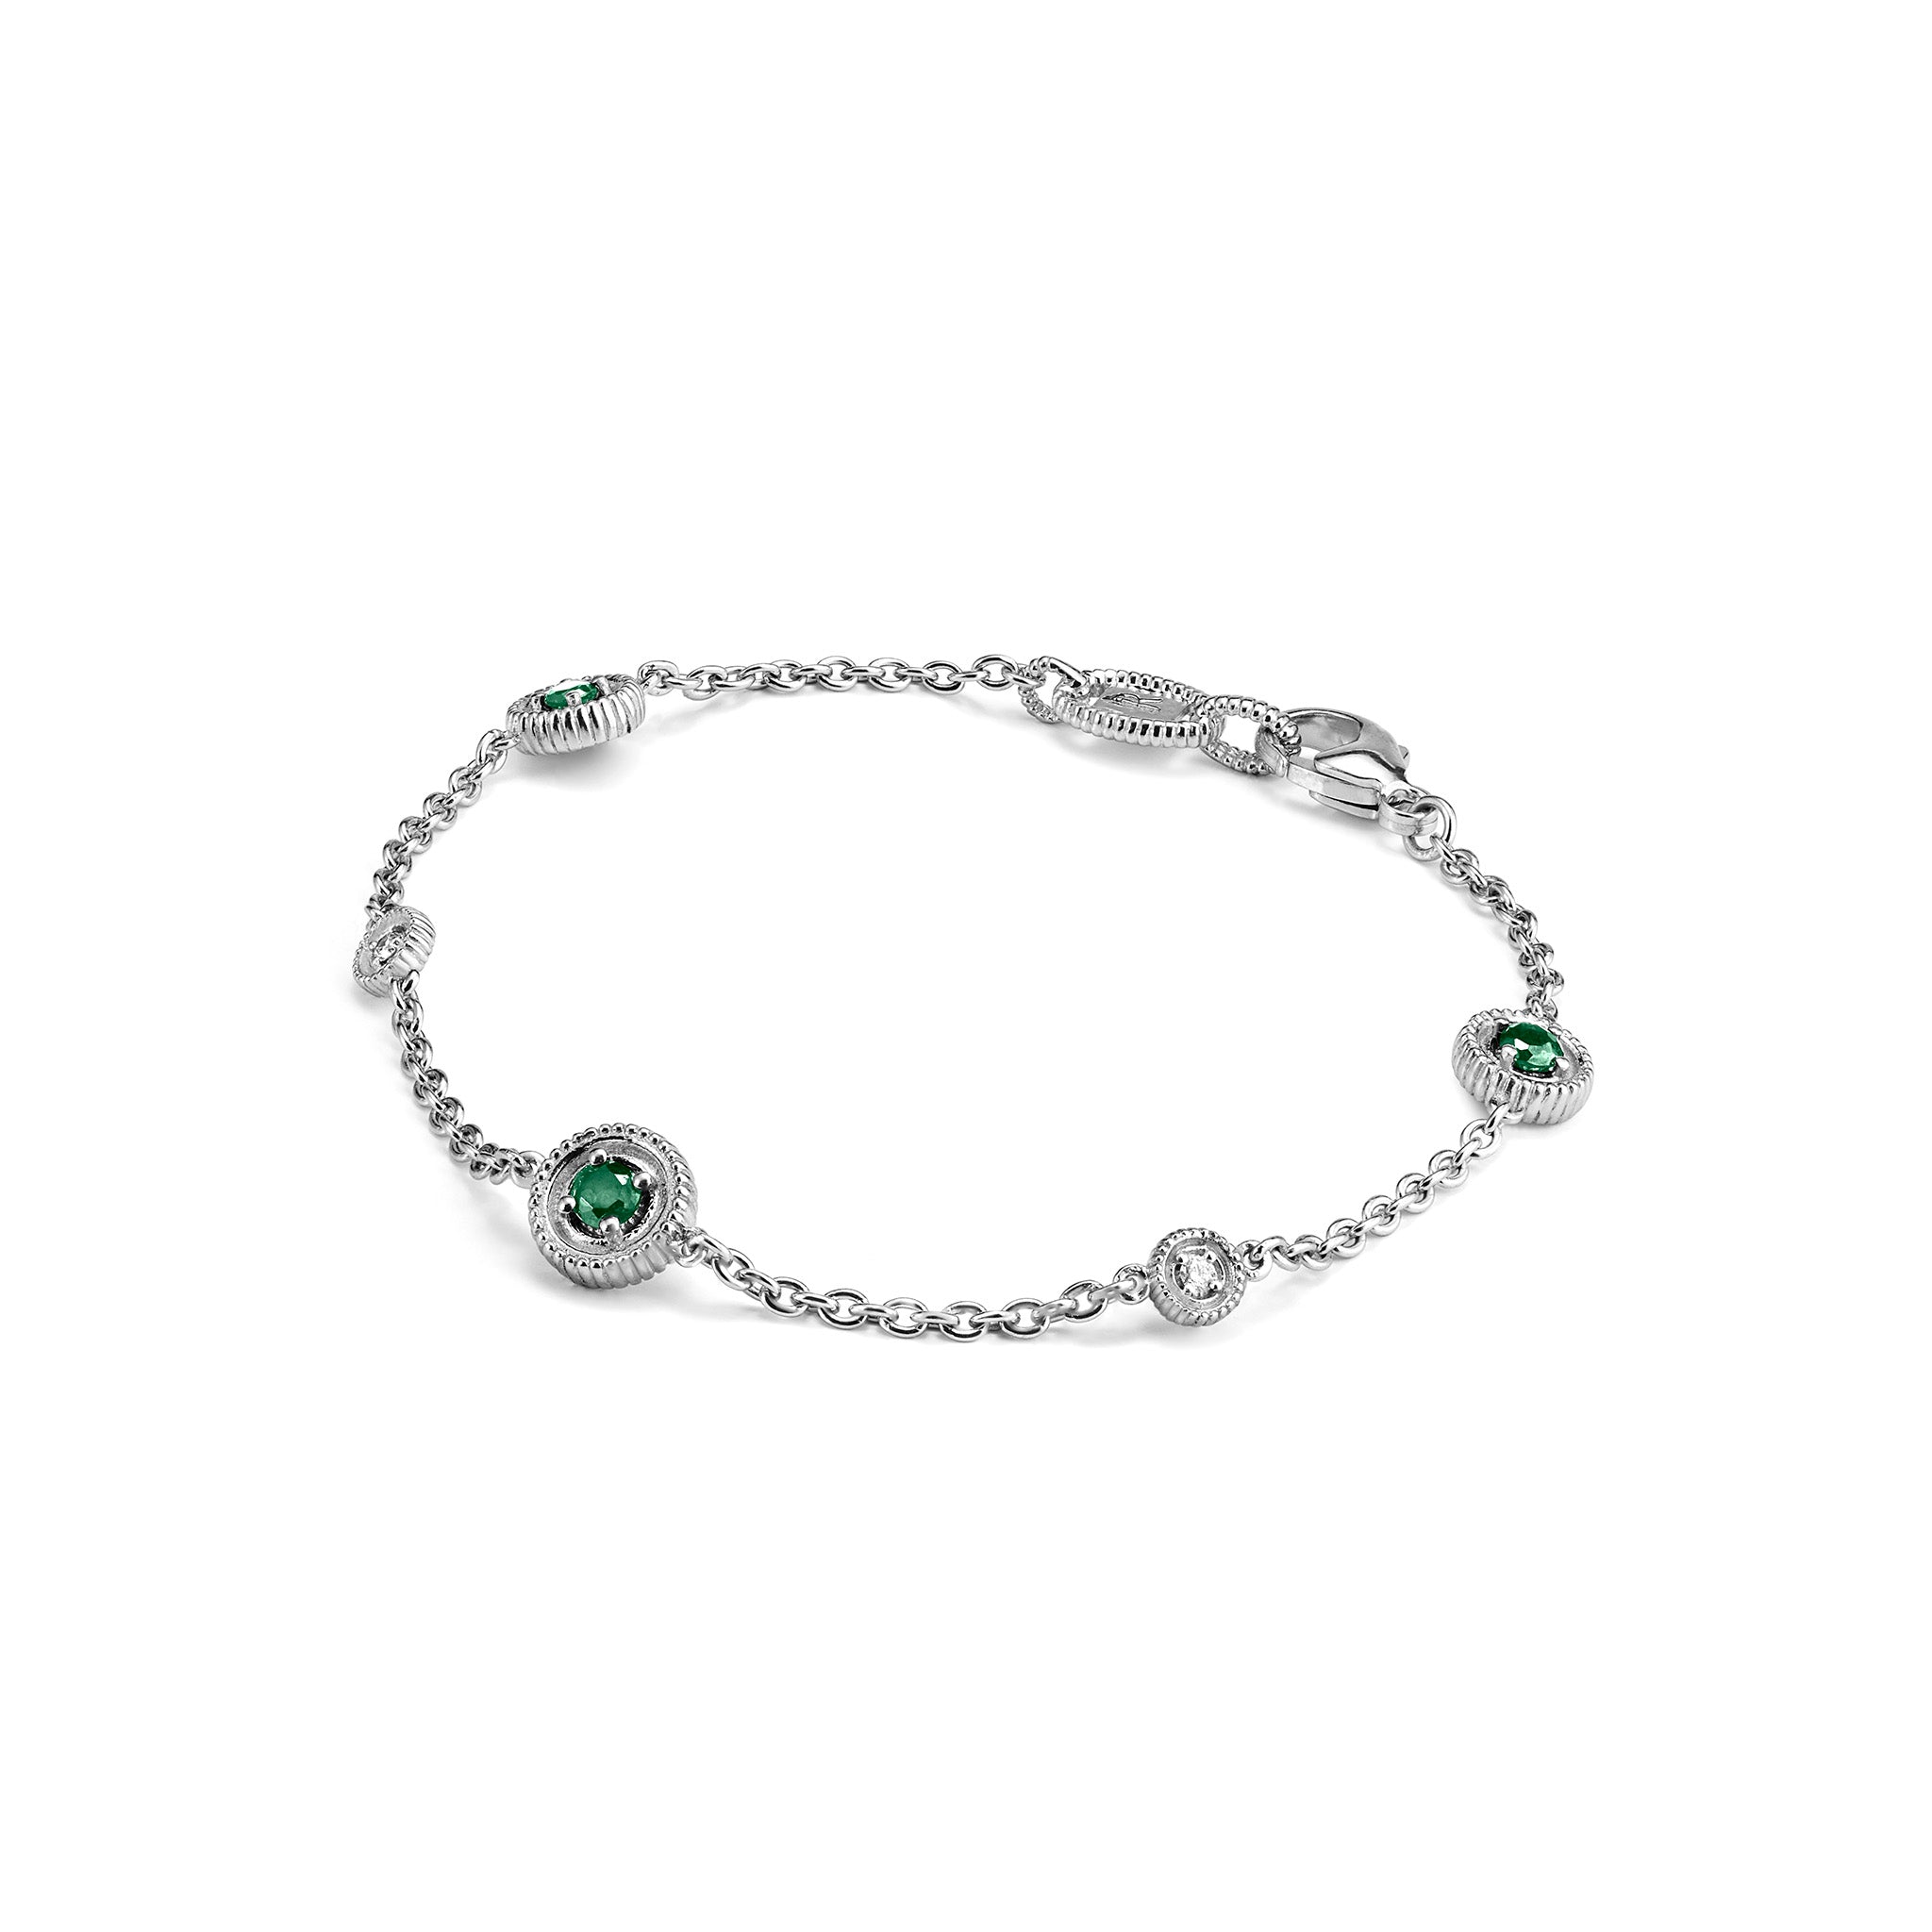 Max Bracelet with Emerald and Diamonds